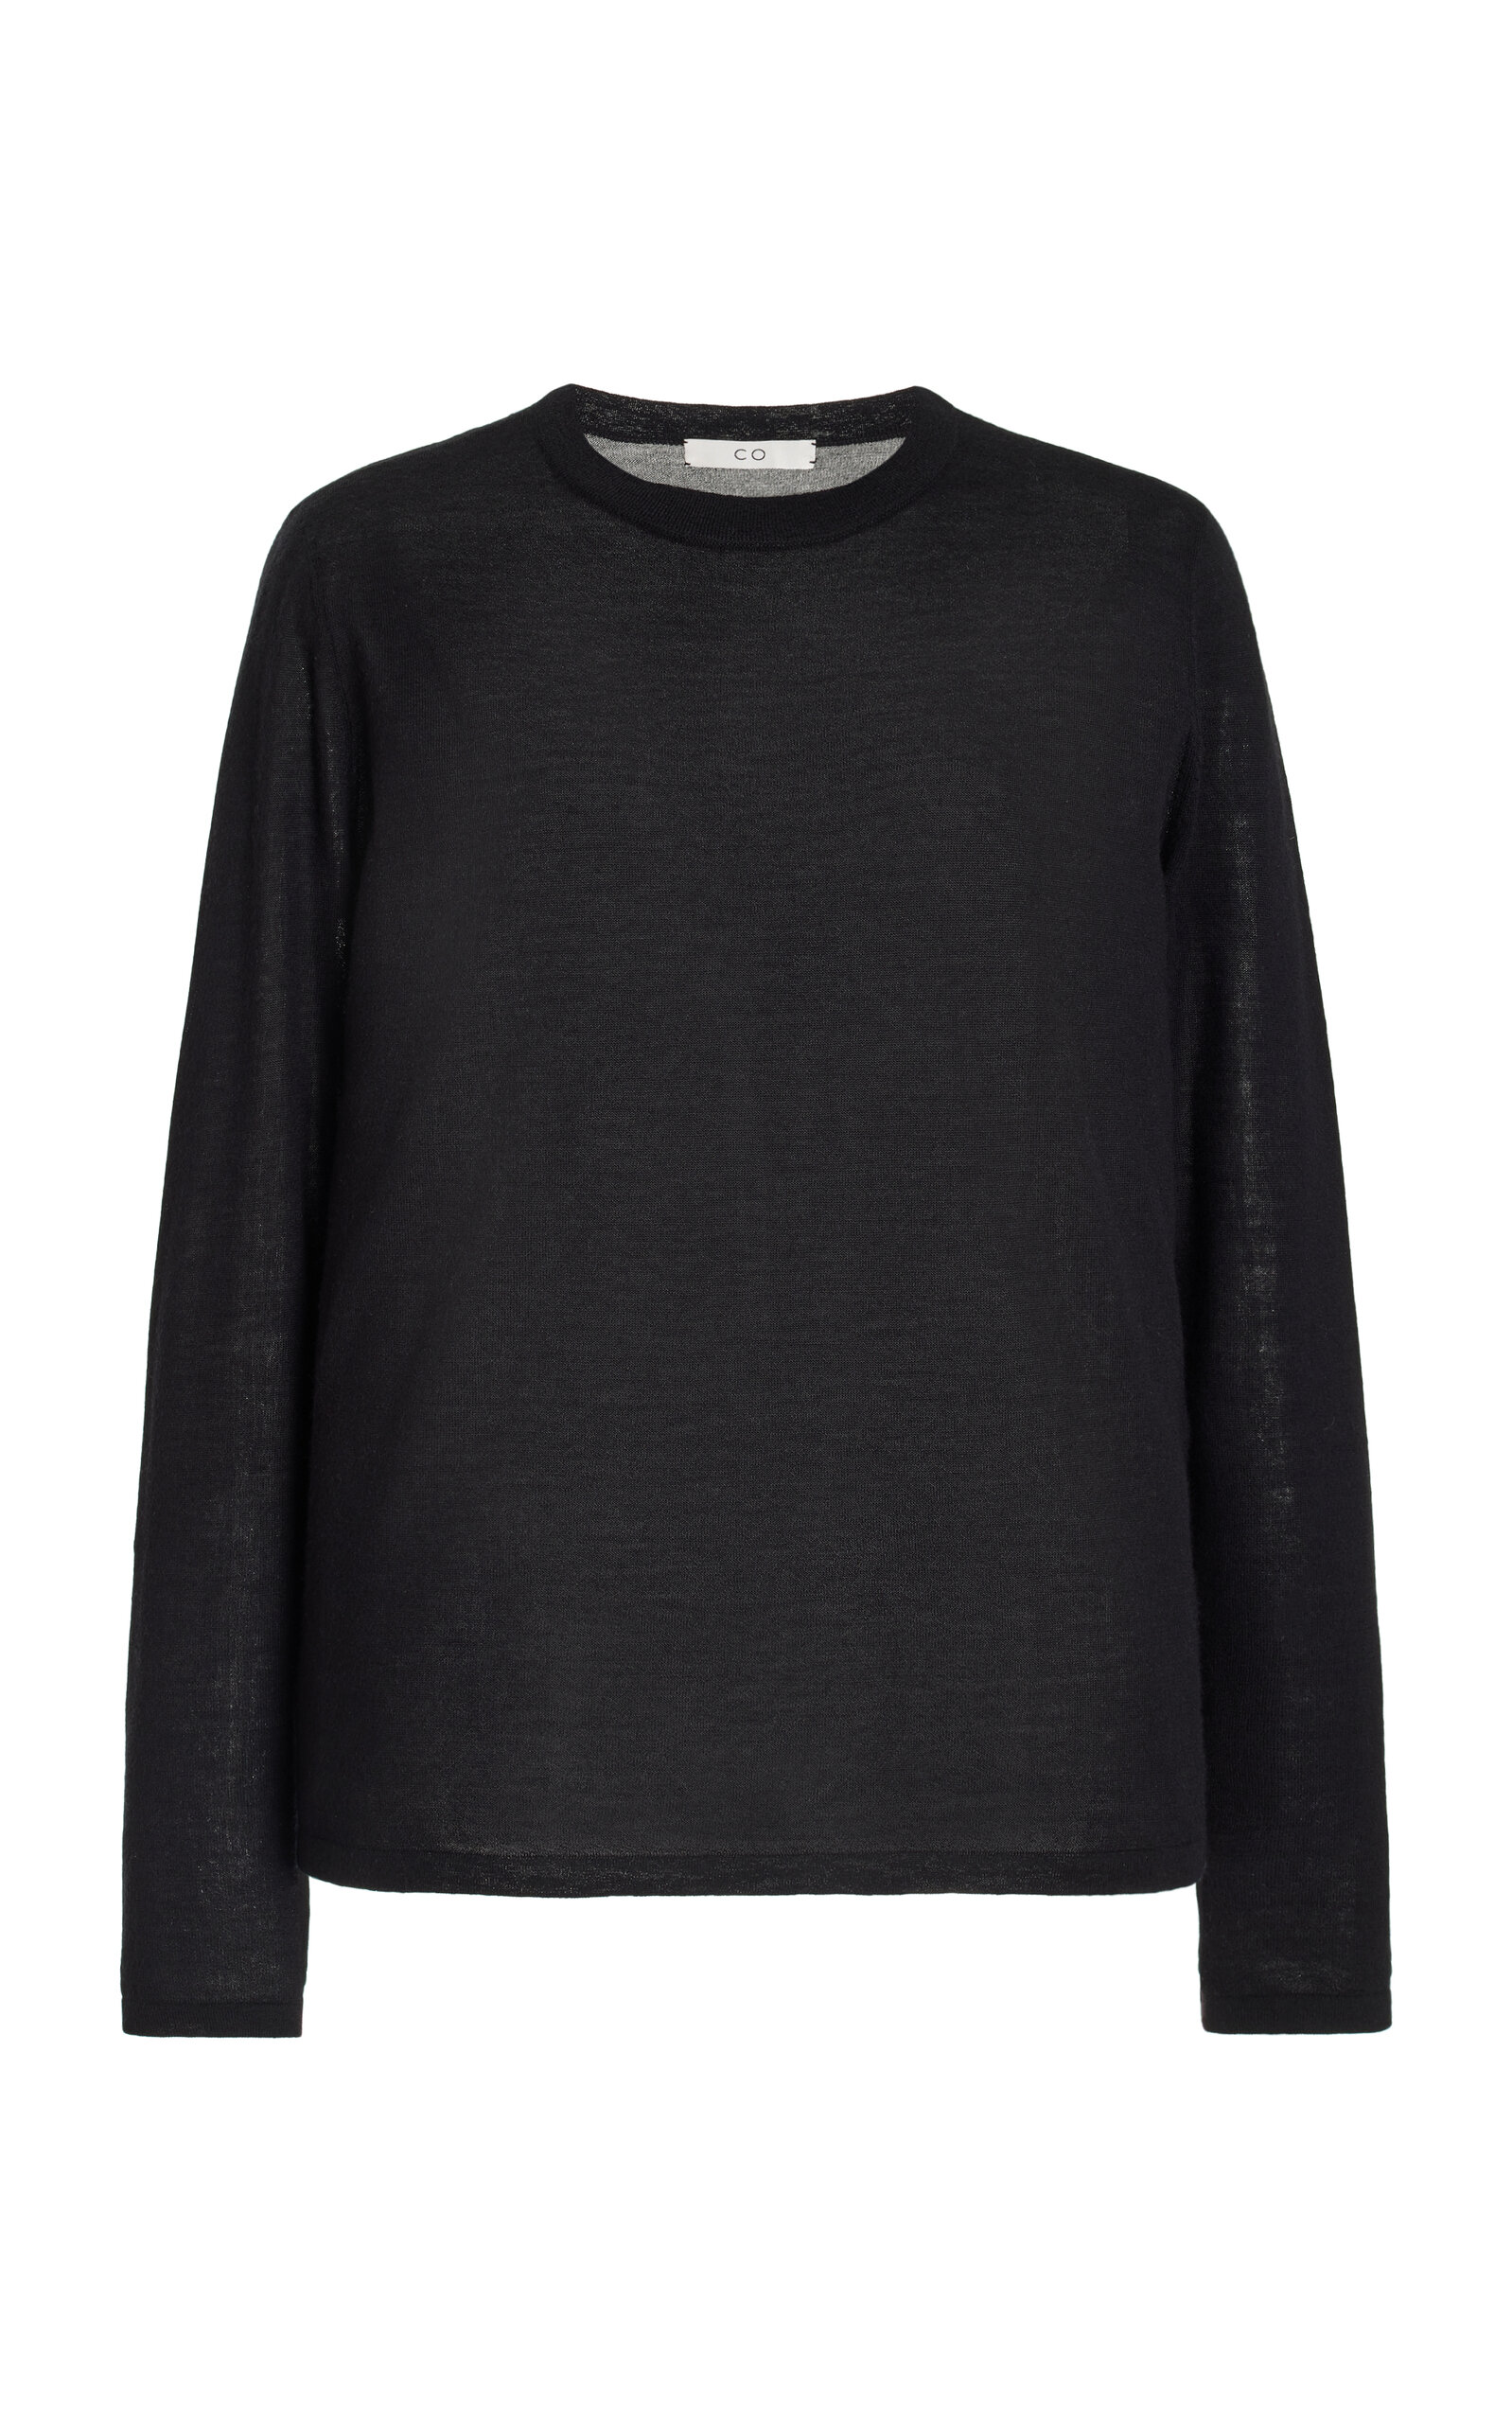 CO LONG SLEEVE CASHMERE TOP